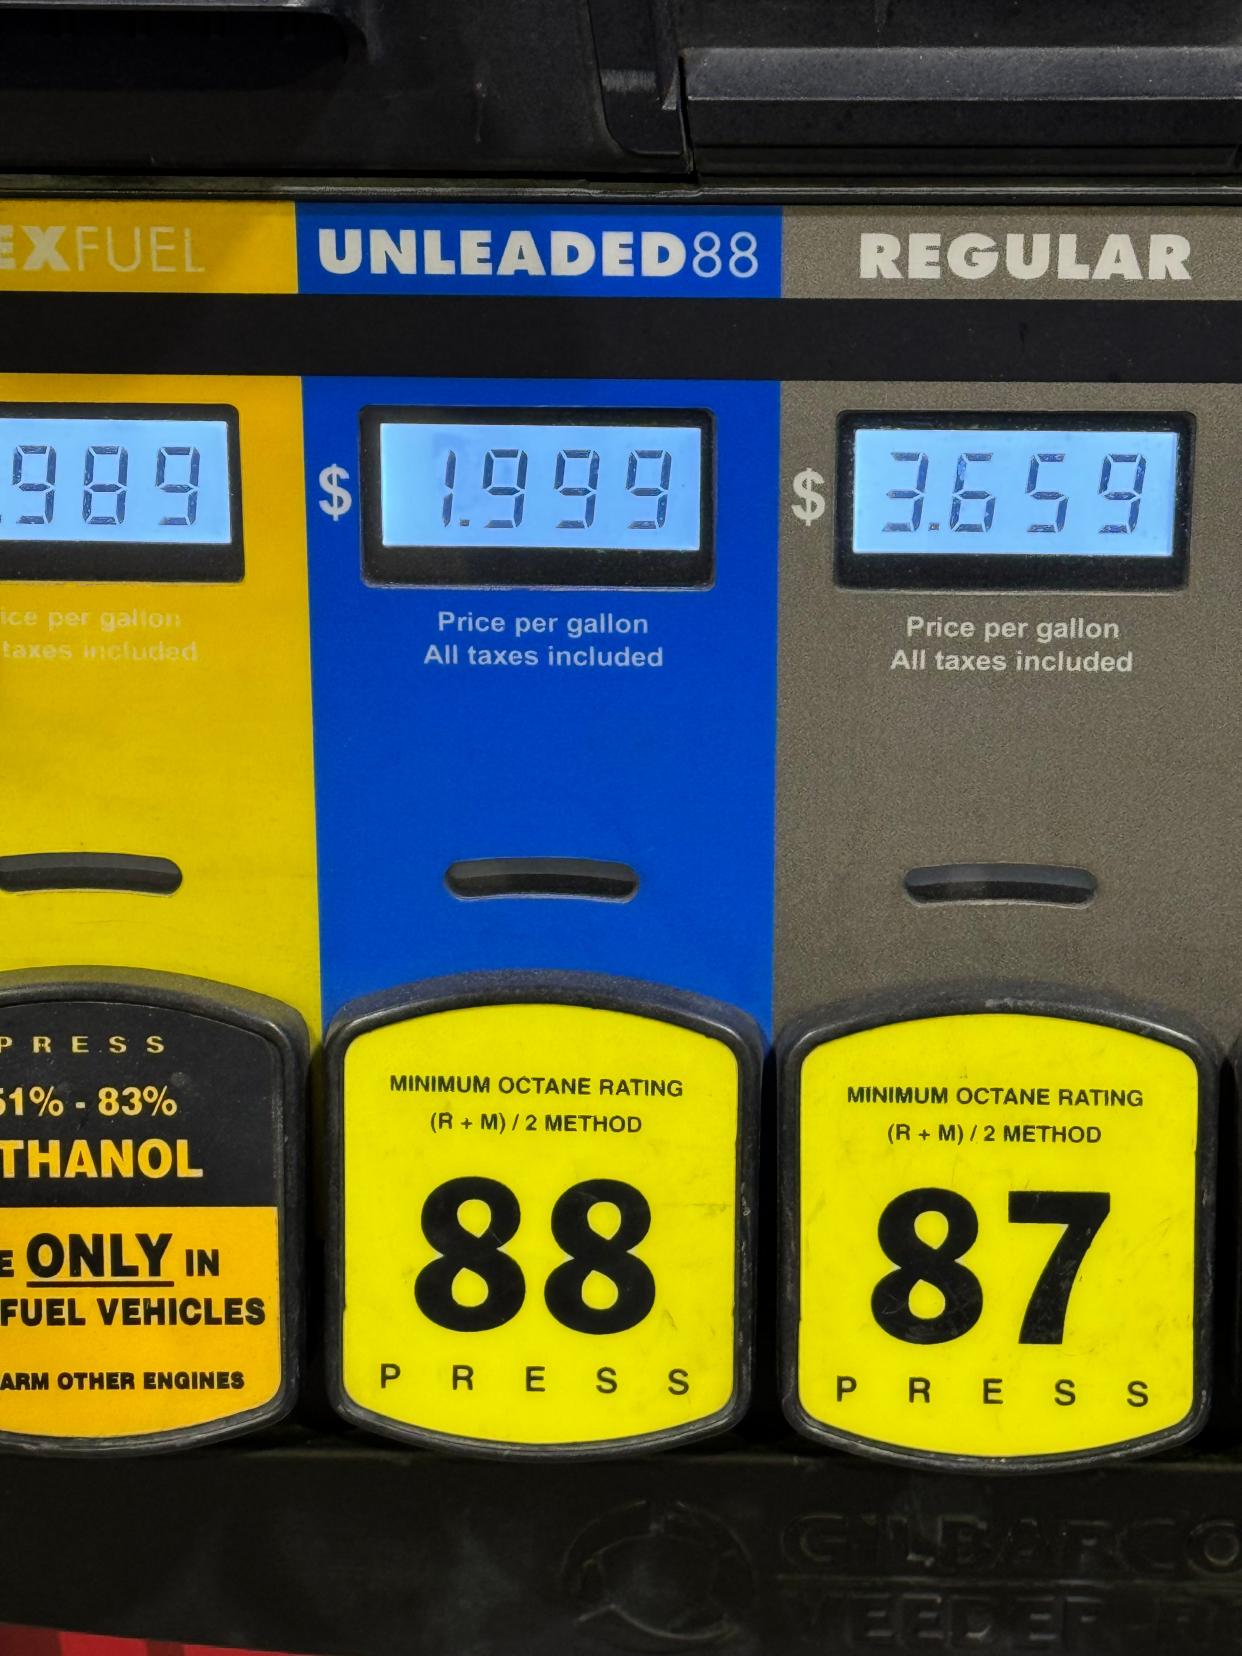 Sheetz is dropping the price of Unleaded 88 to $1.99 now through Nov. 27.